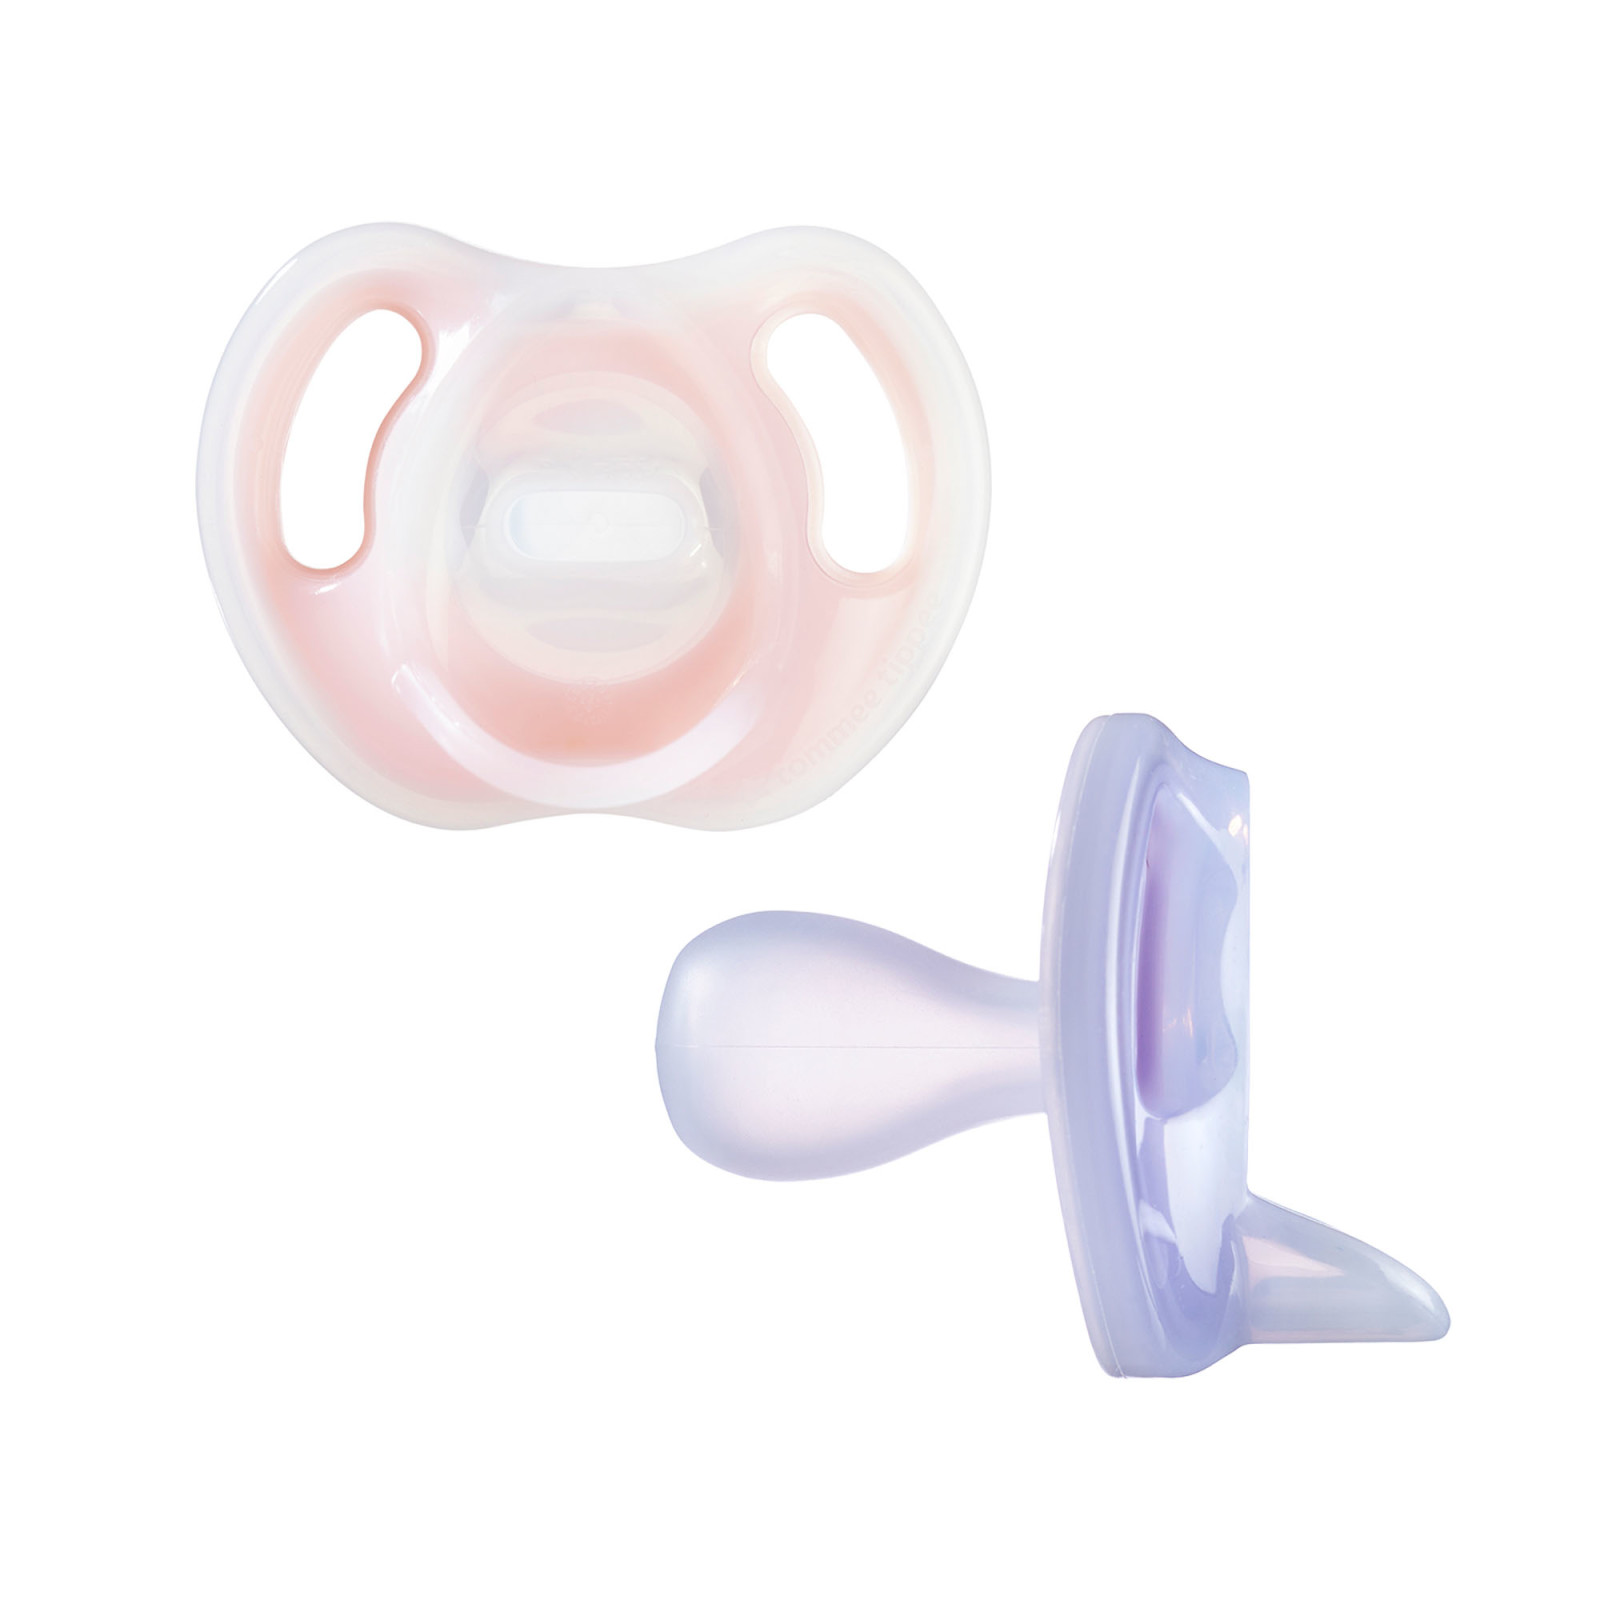 Tommee Tippee Ultra-Light Silicone Pacifier, 6-18 months, Symmetrical One-Piece Design, BPA-Free Silicone Binkies, Includes Sterilizer Box, 2 Pack - image 3 of 8